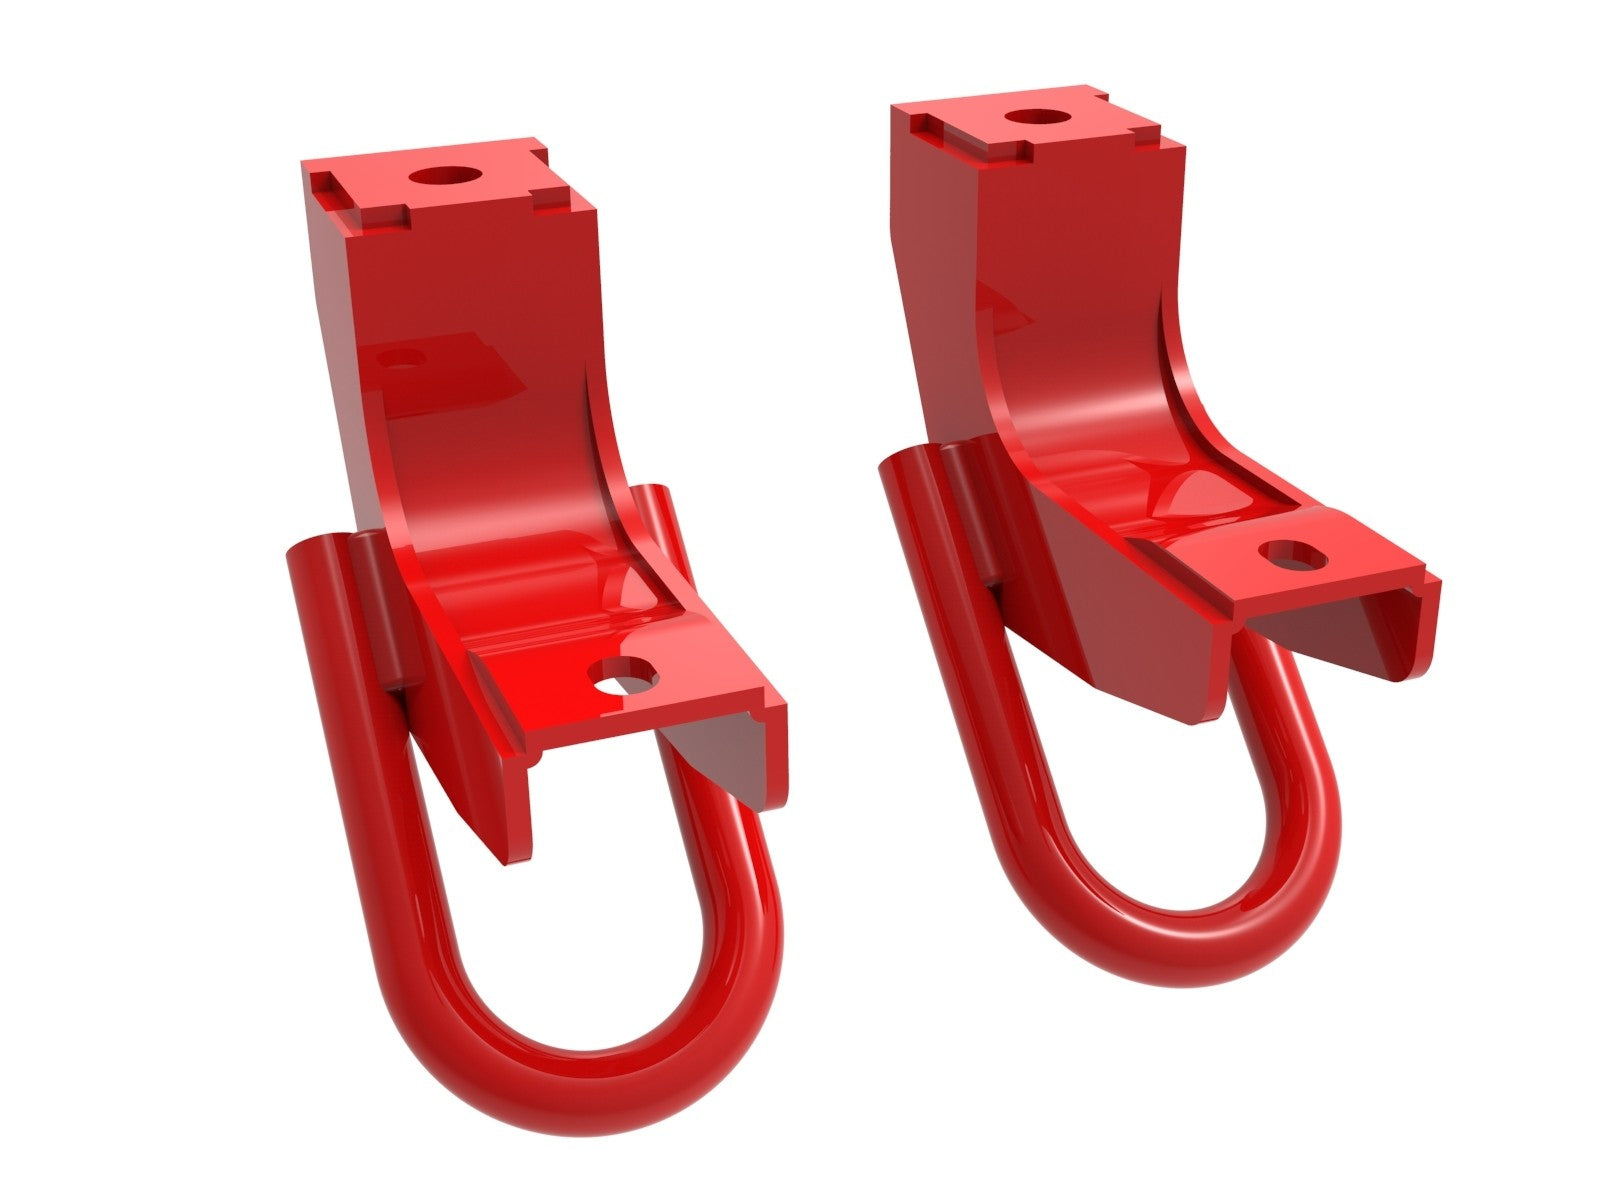 '22-23 Toyota Tundra aFe Control Red Front Tow Hooks (front view)